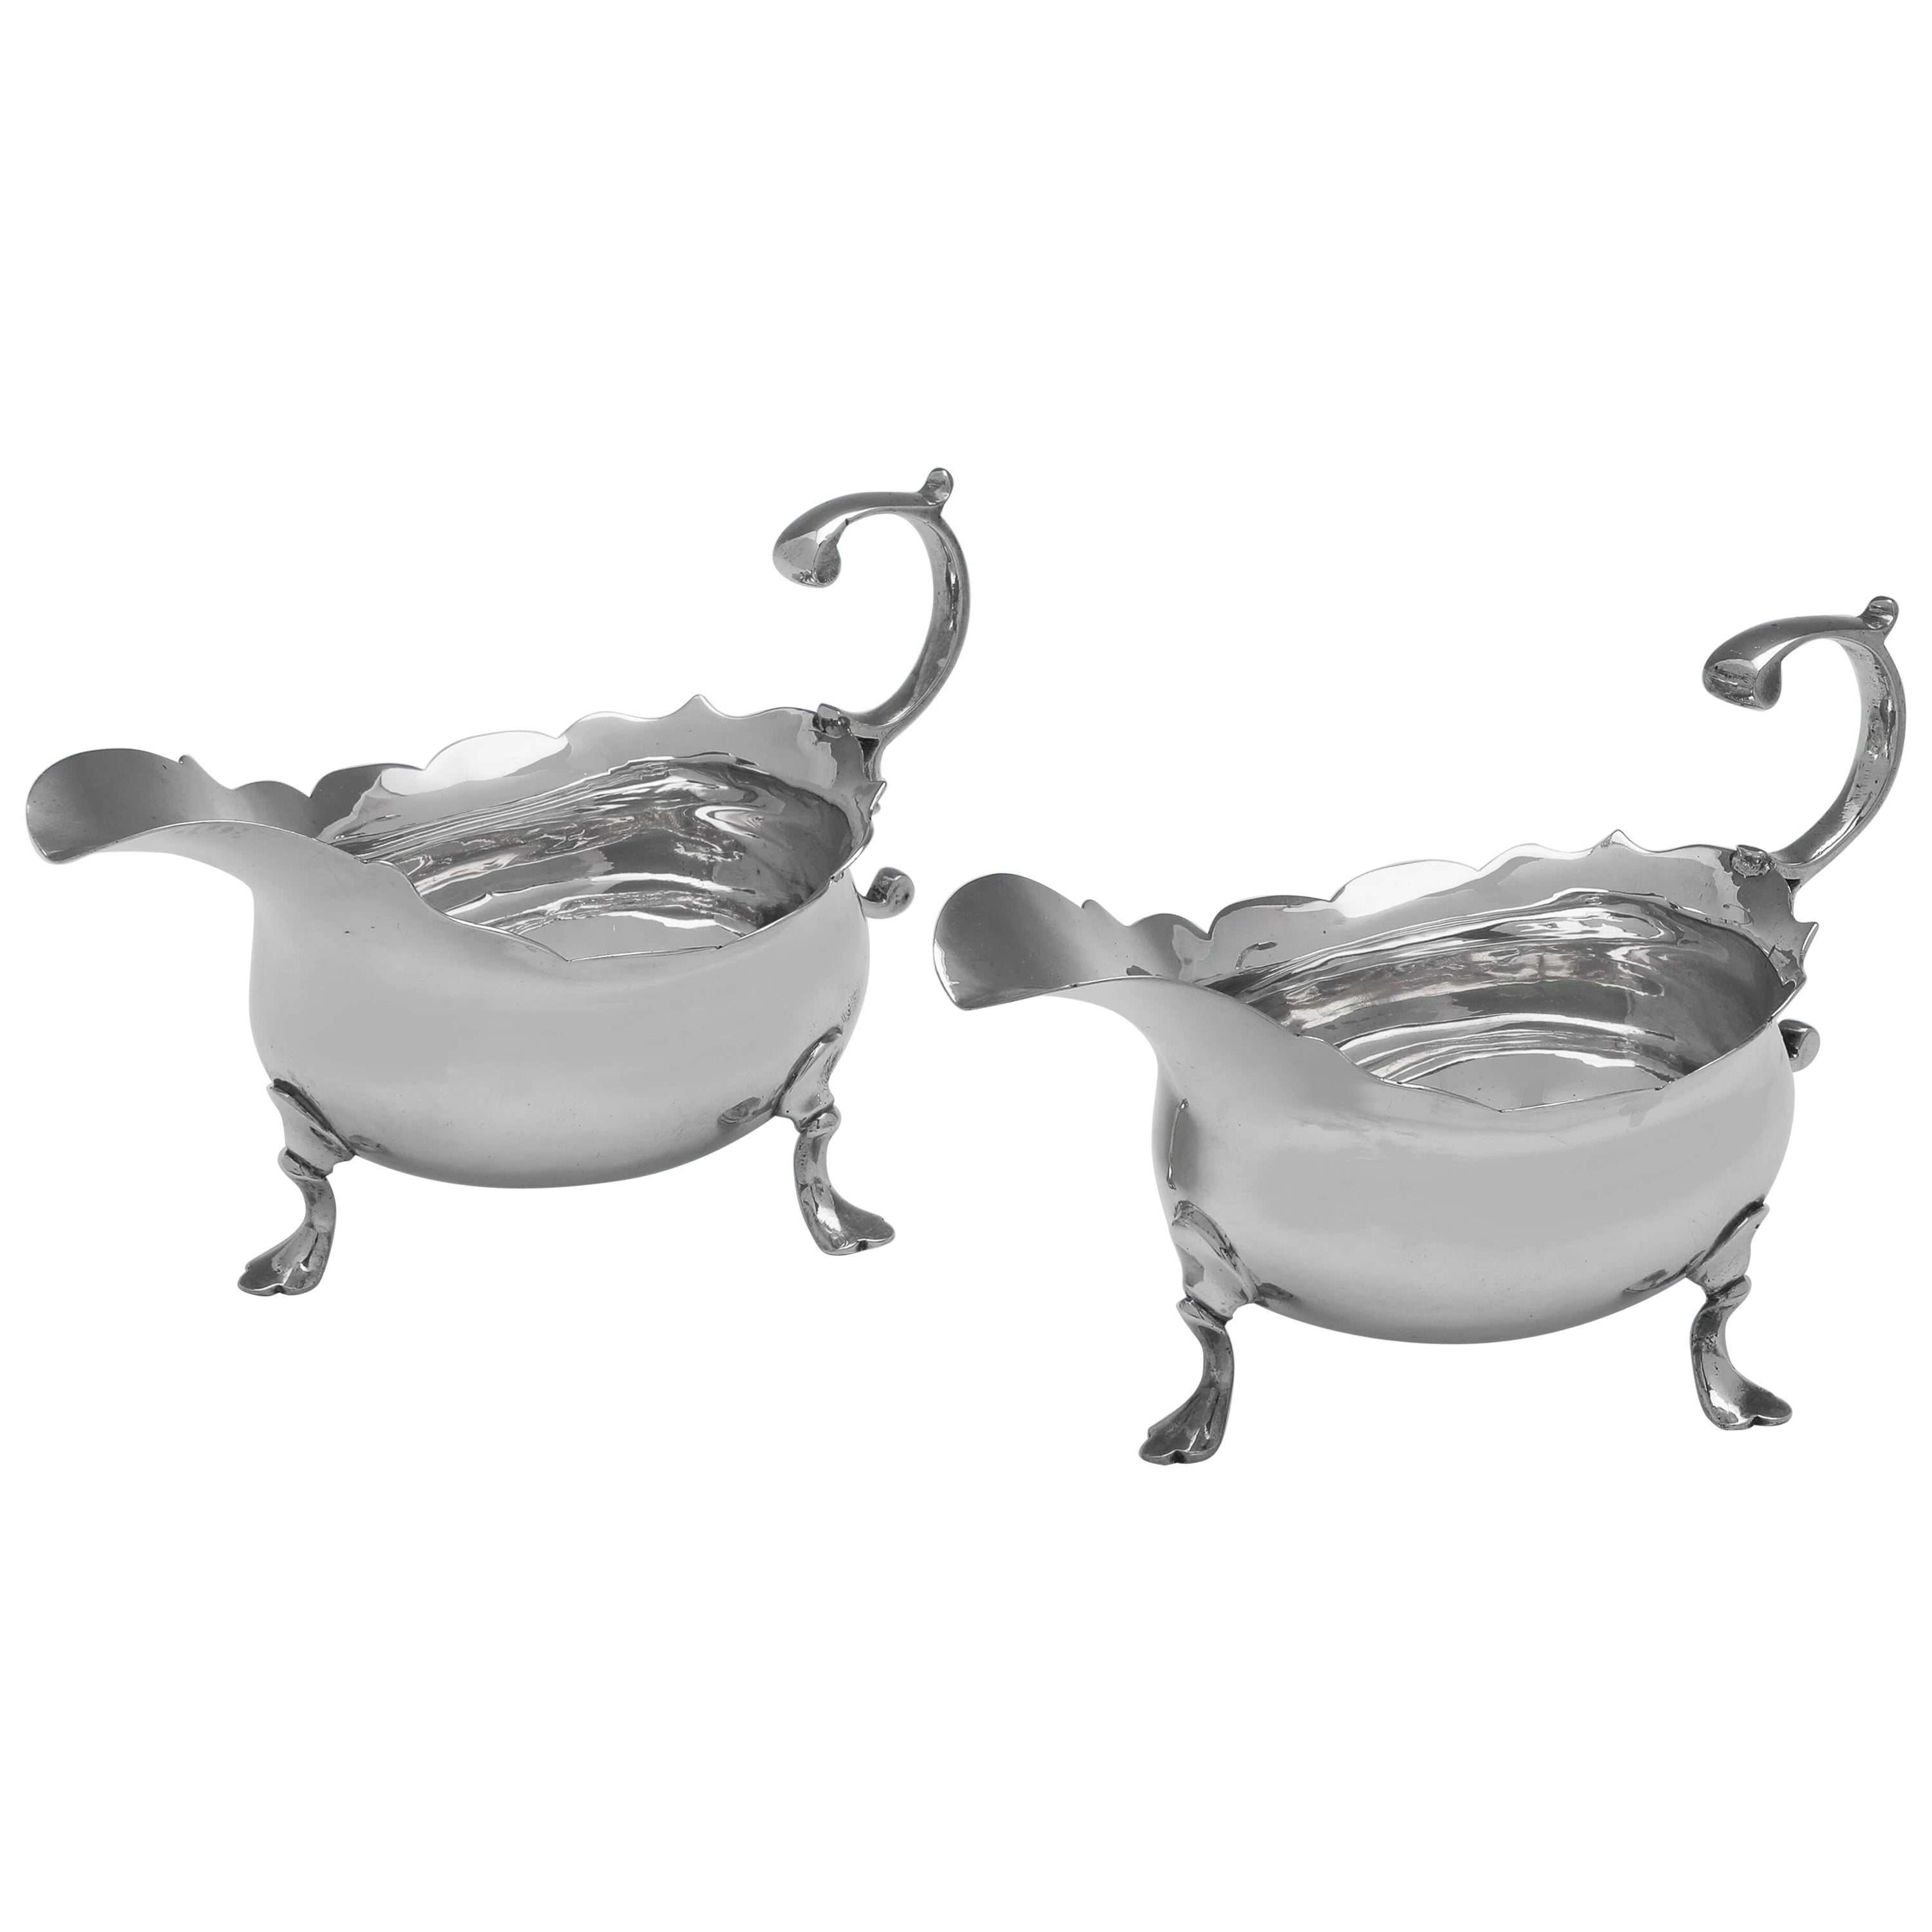 George II Antique Sterling Silver Pair of Sauce Boats, London 1751 David Mowden